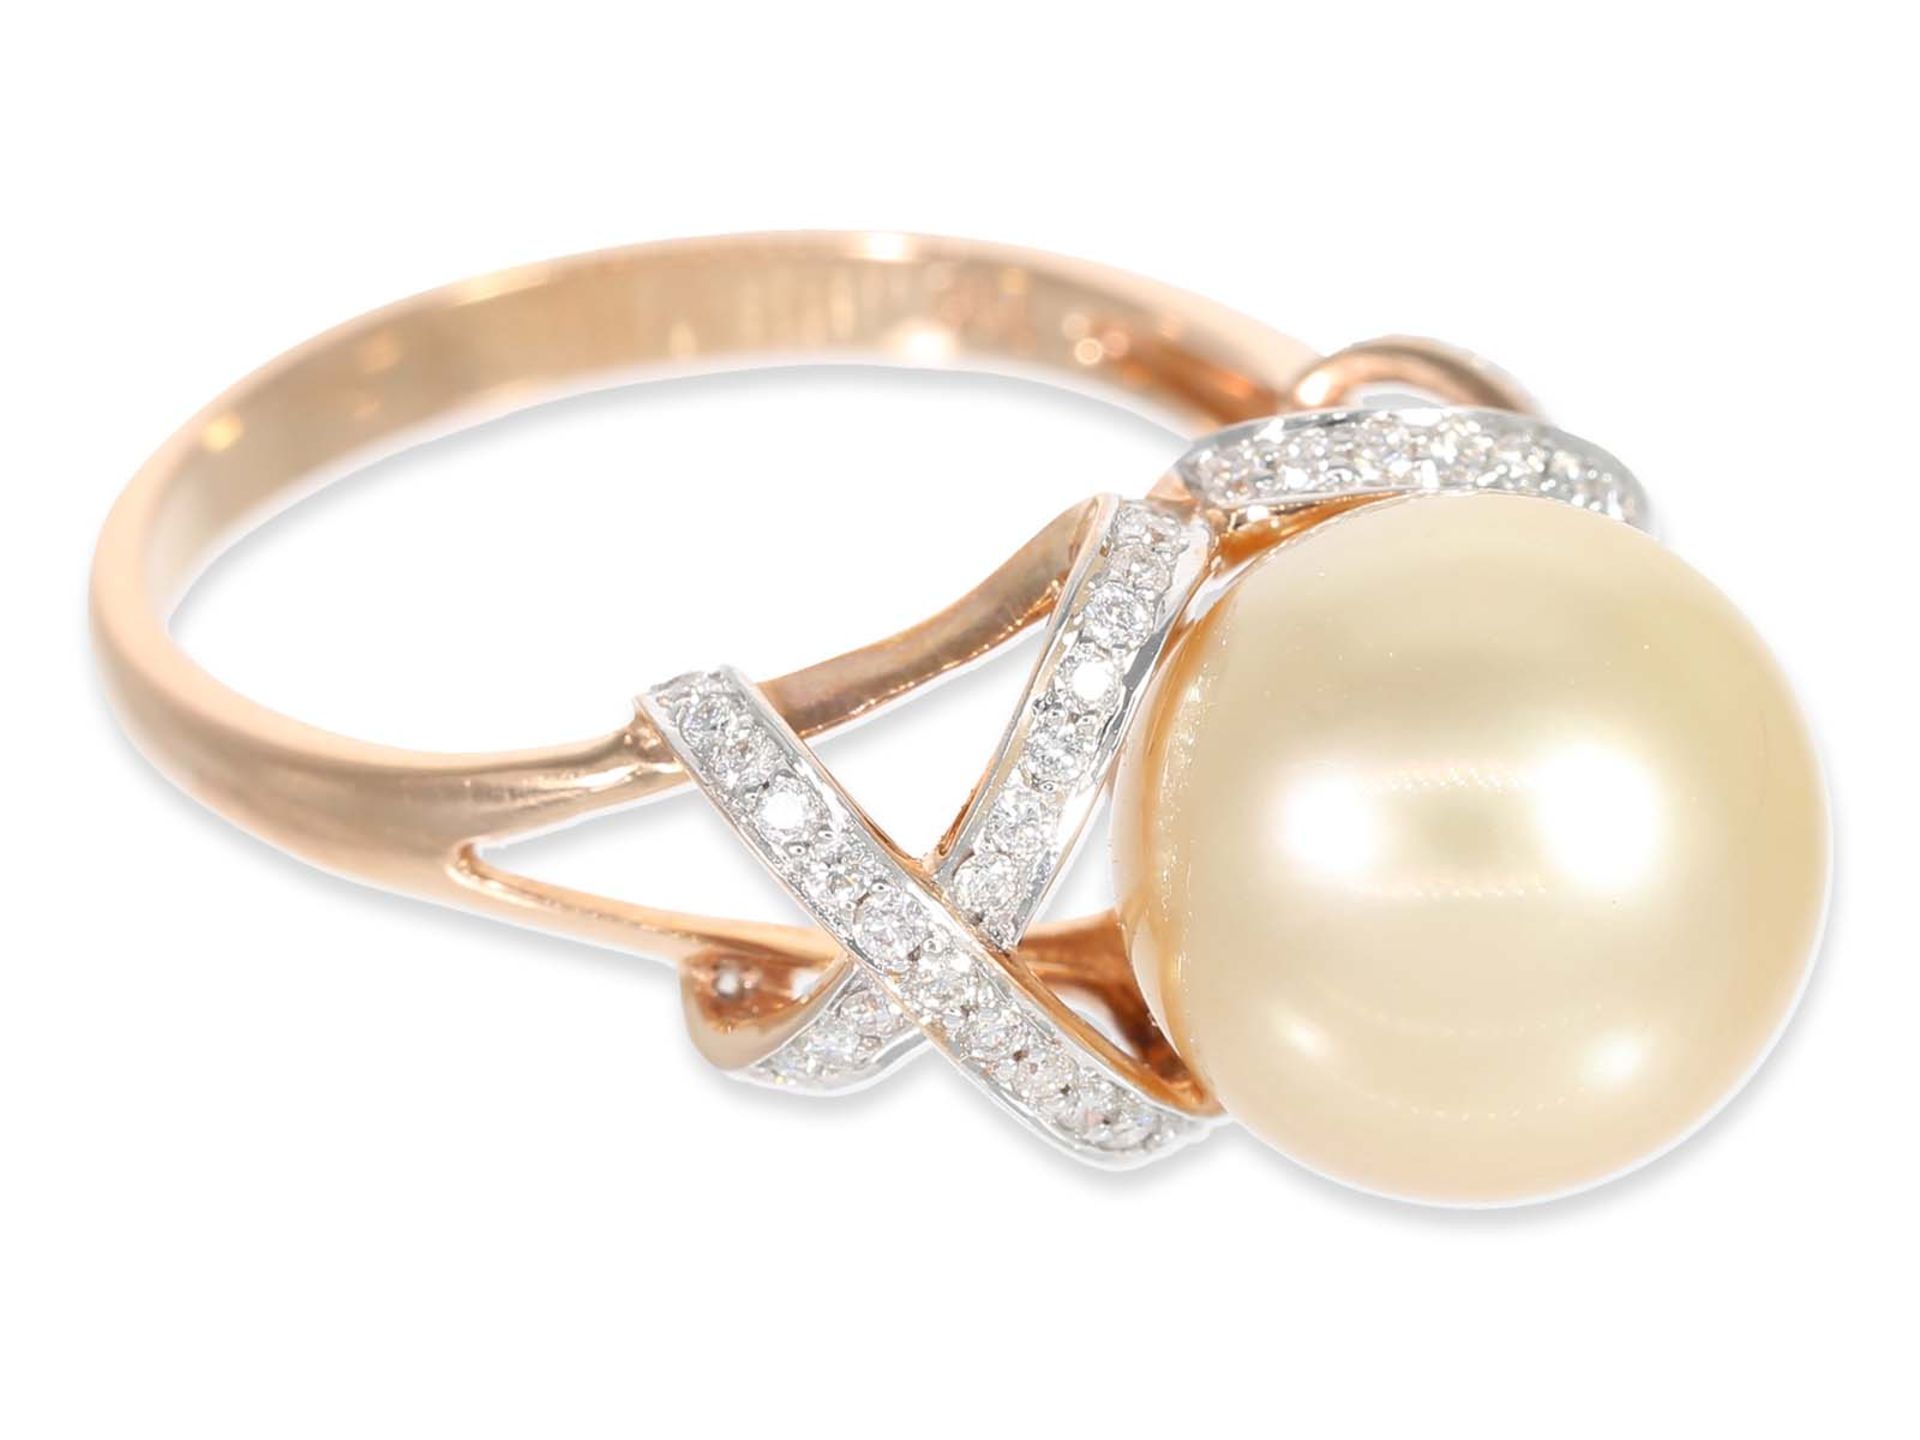 Ring: attractive South Sea cultured pearl ring with diamonds, total approx. 0.6ct, 18K pink gold, li - Image 2 of 4